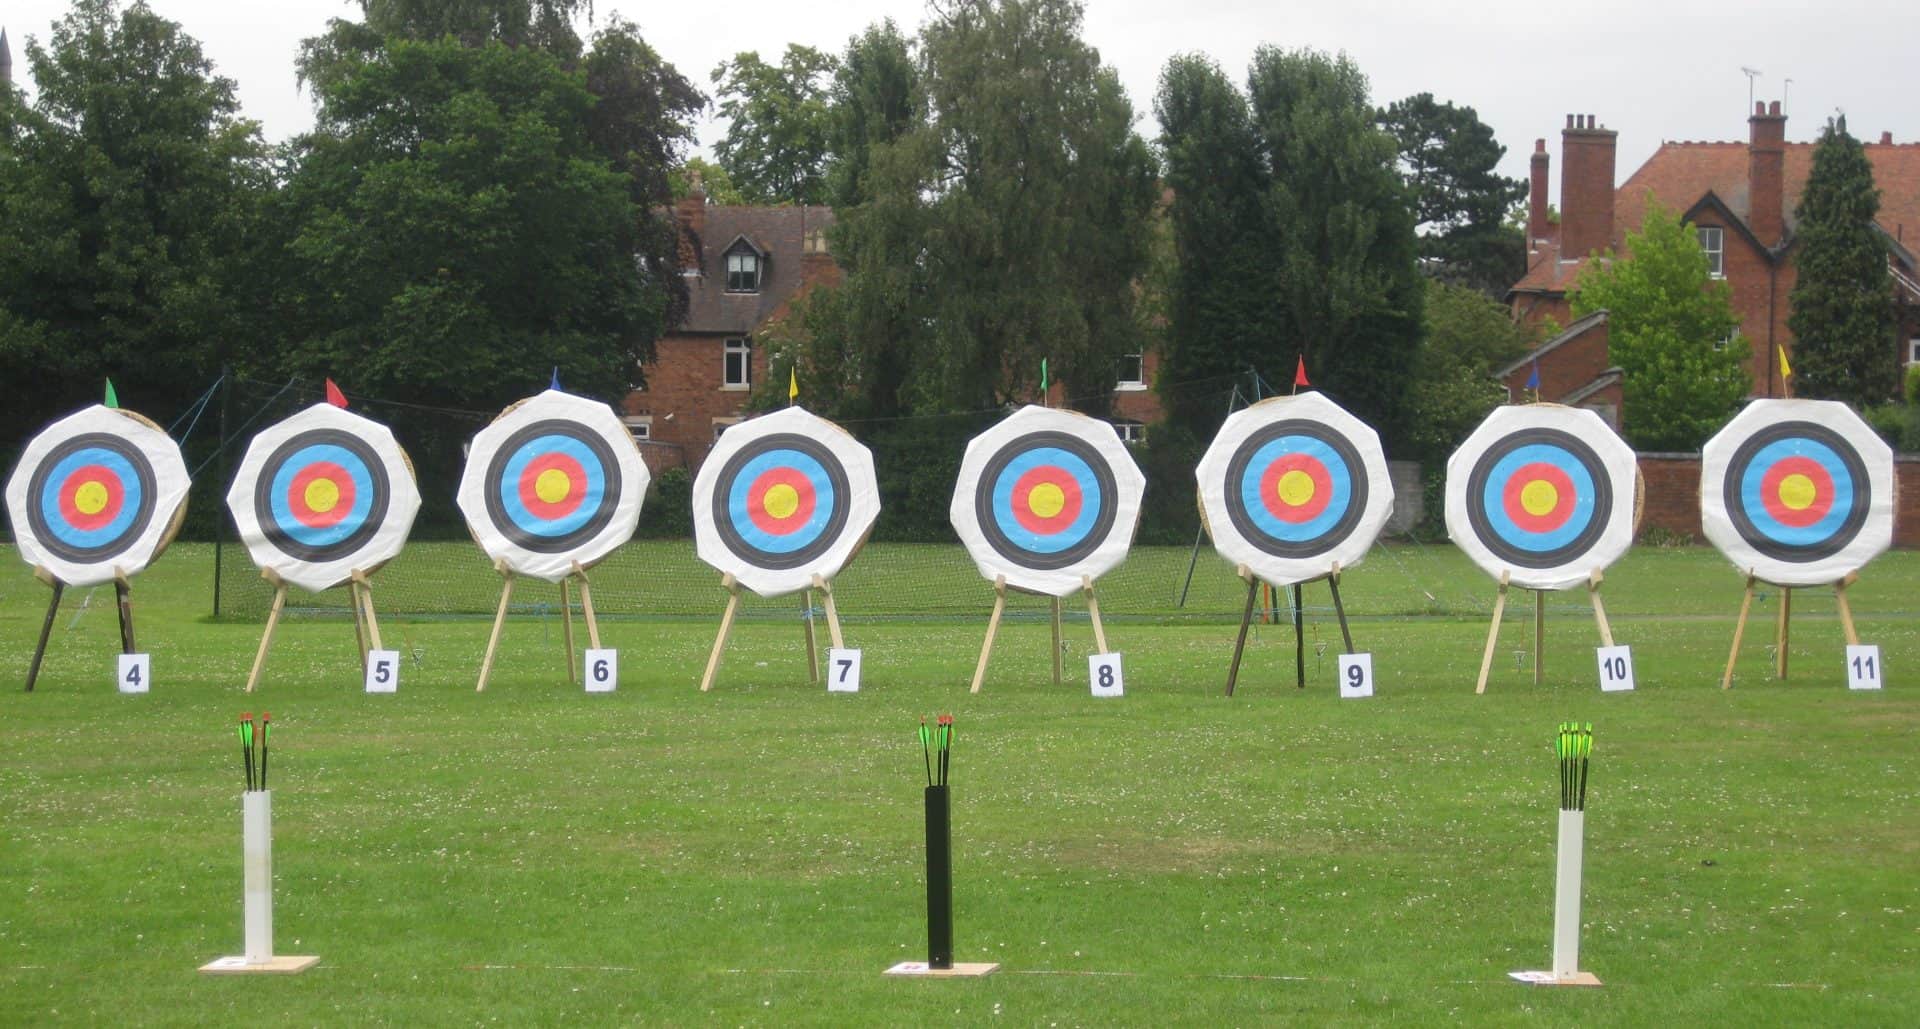 Company insurance is intended to safeguard the financial assets of a business owner and is a necessary investment for an archery range.